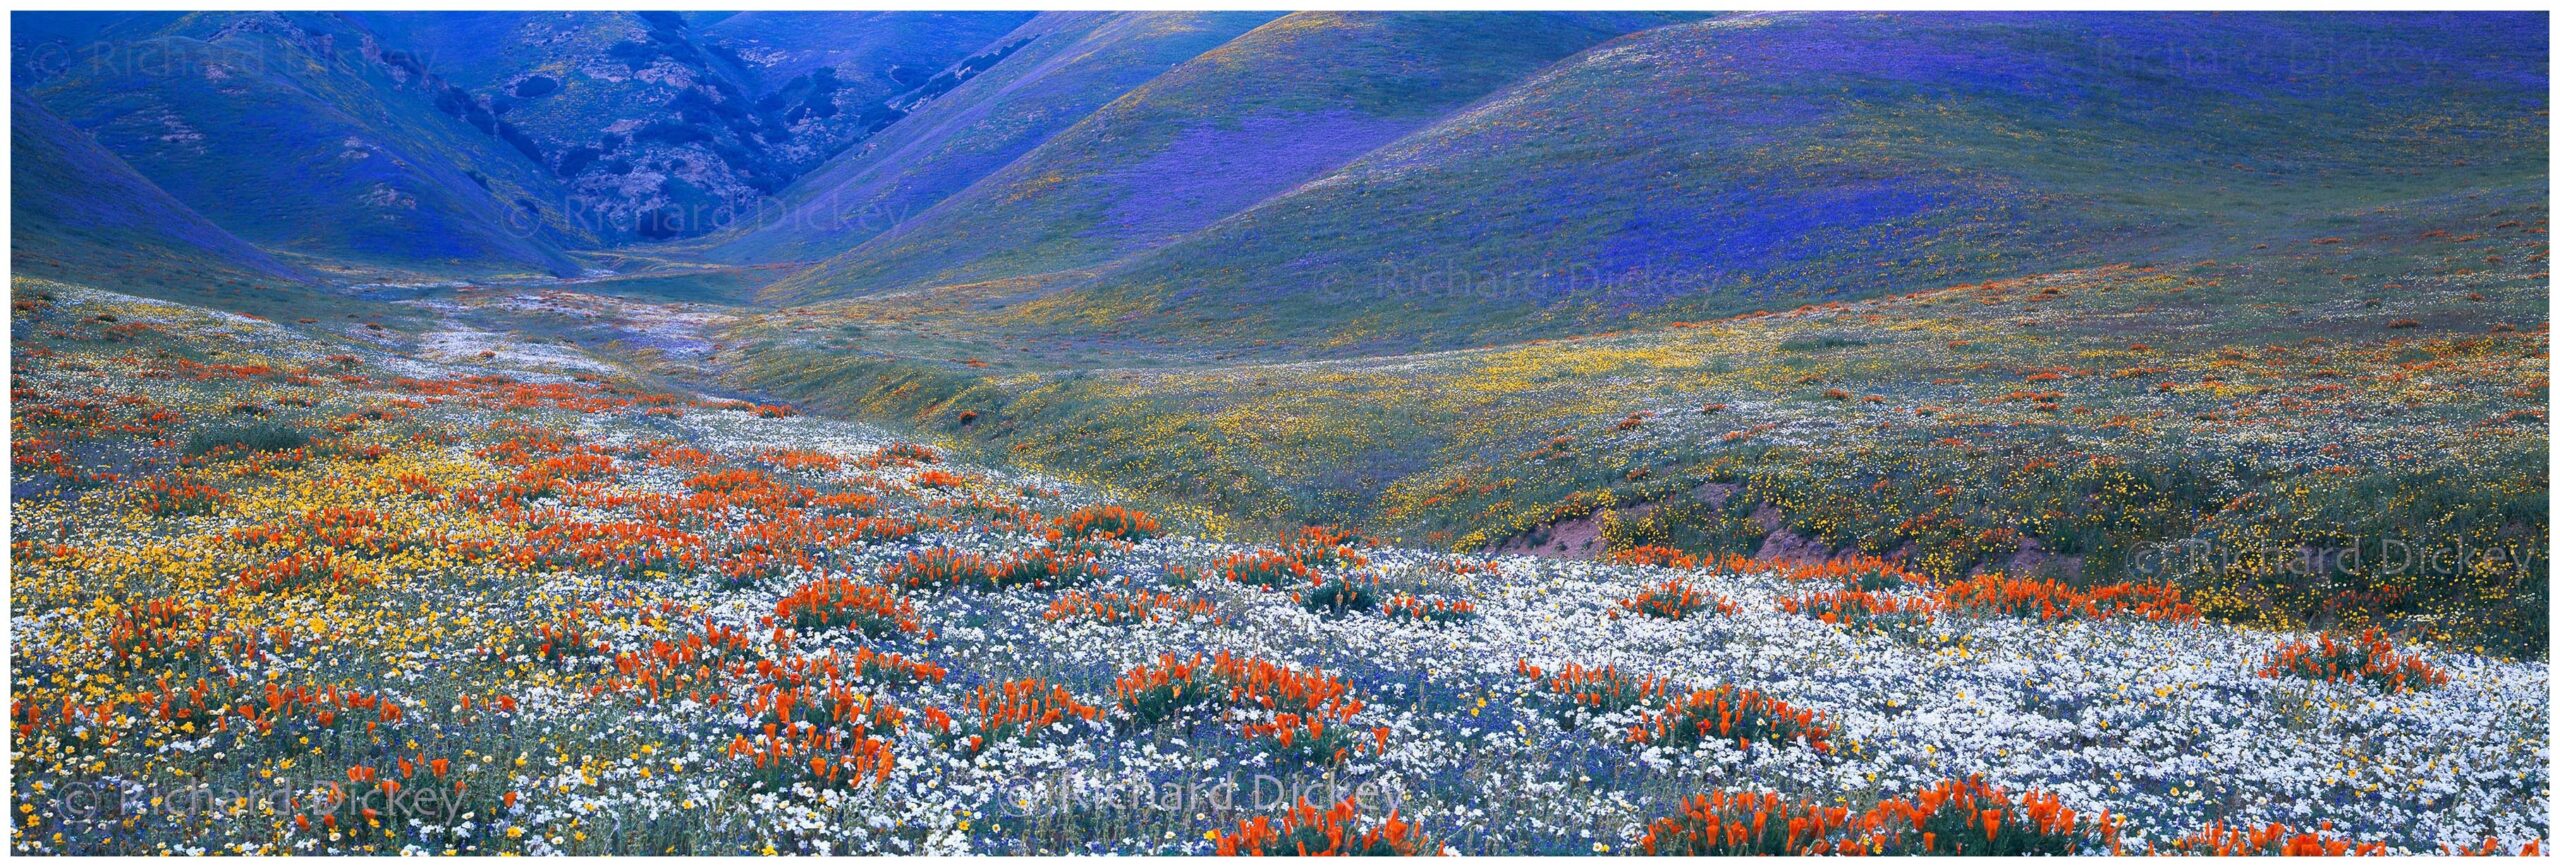 Panoramic photograph of beautiful canyon covered with white, orange, yellow, and blue wildflowers at dusk.